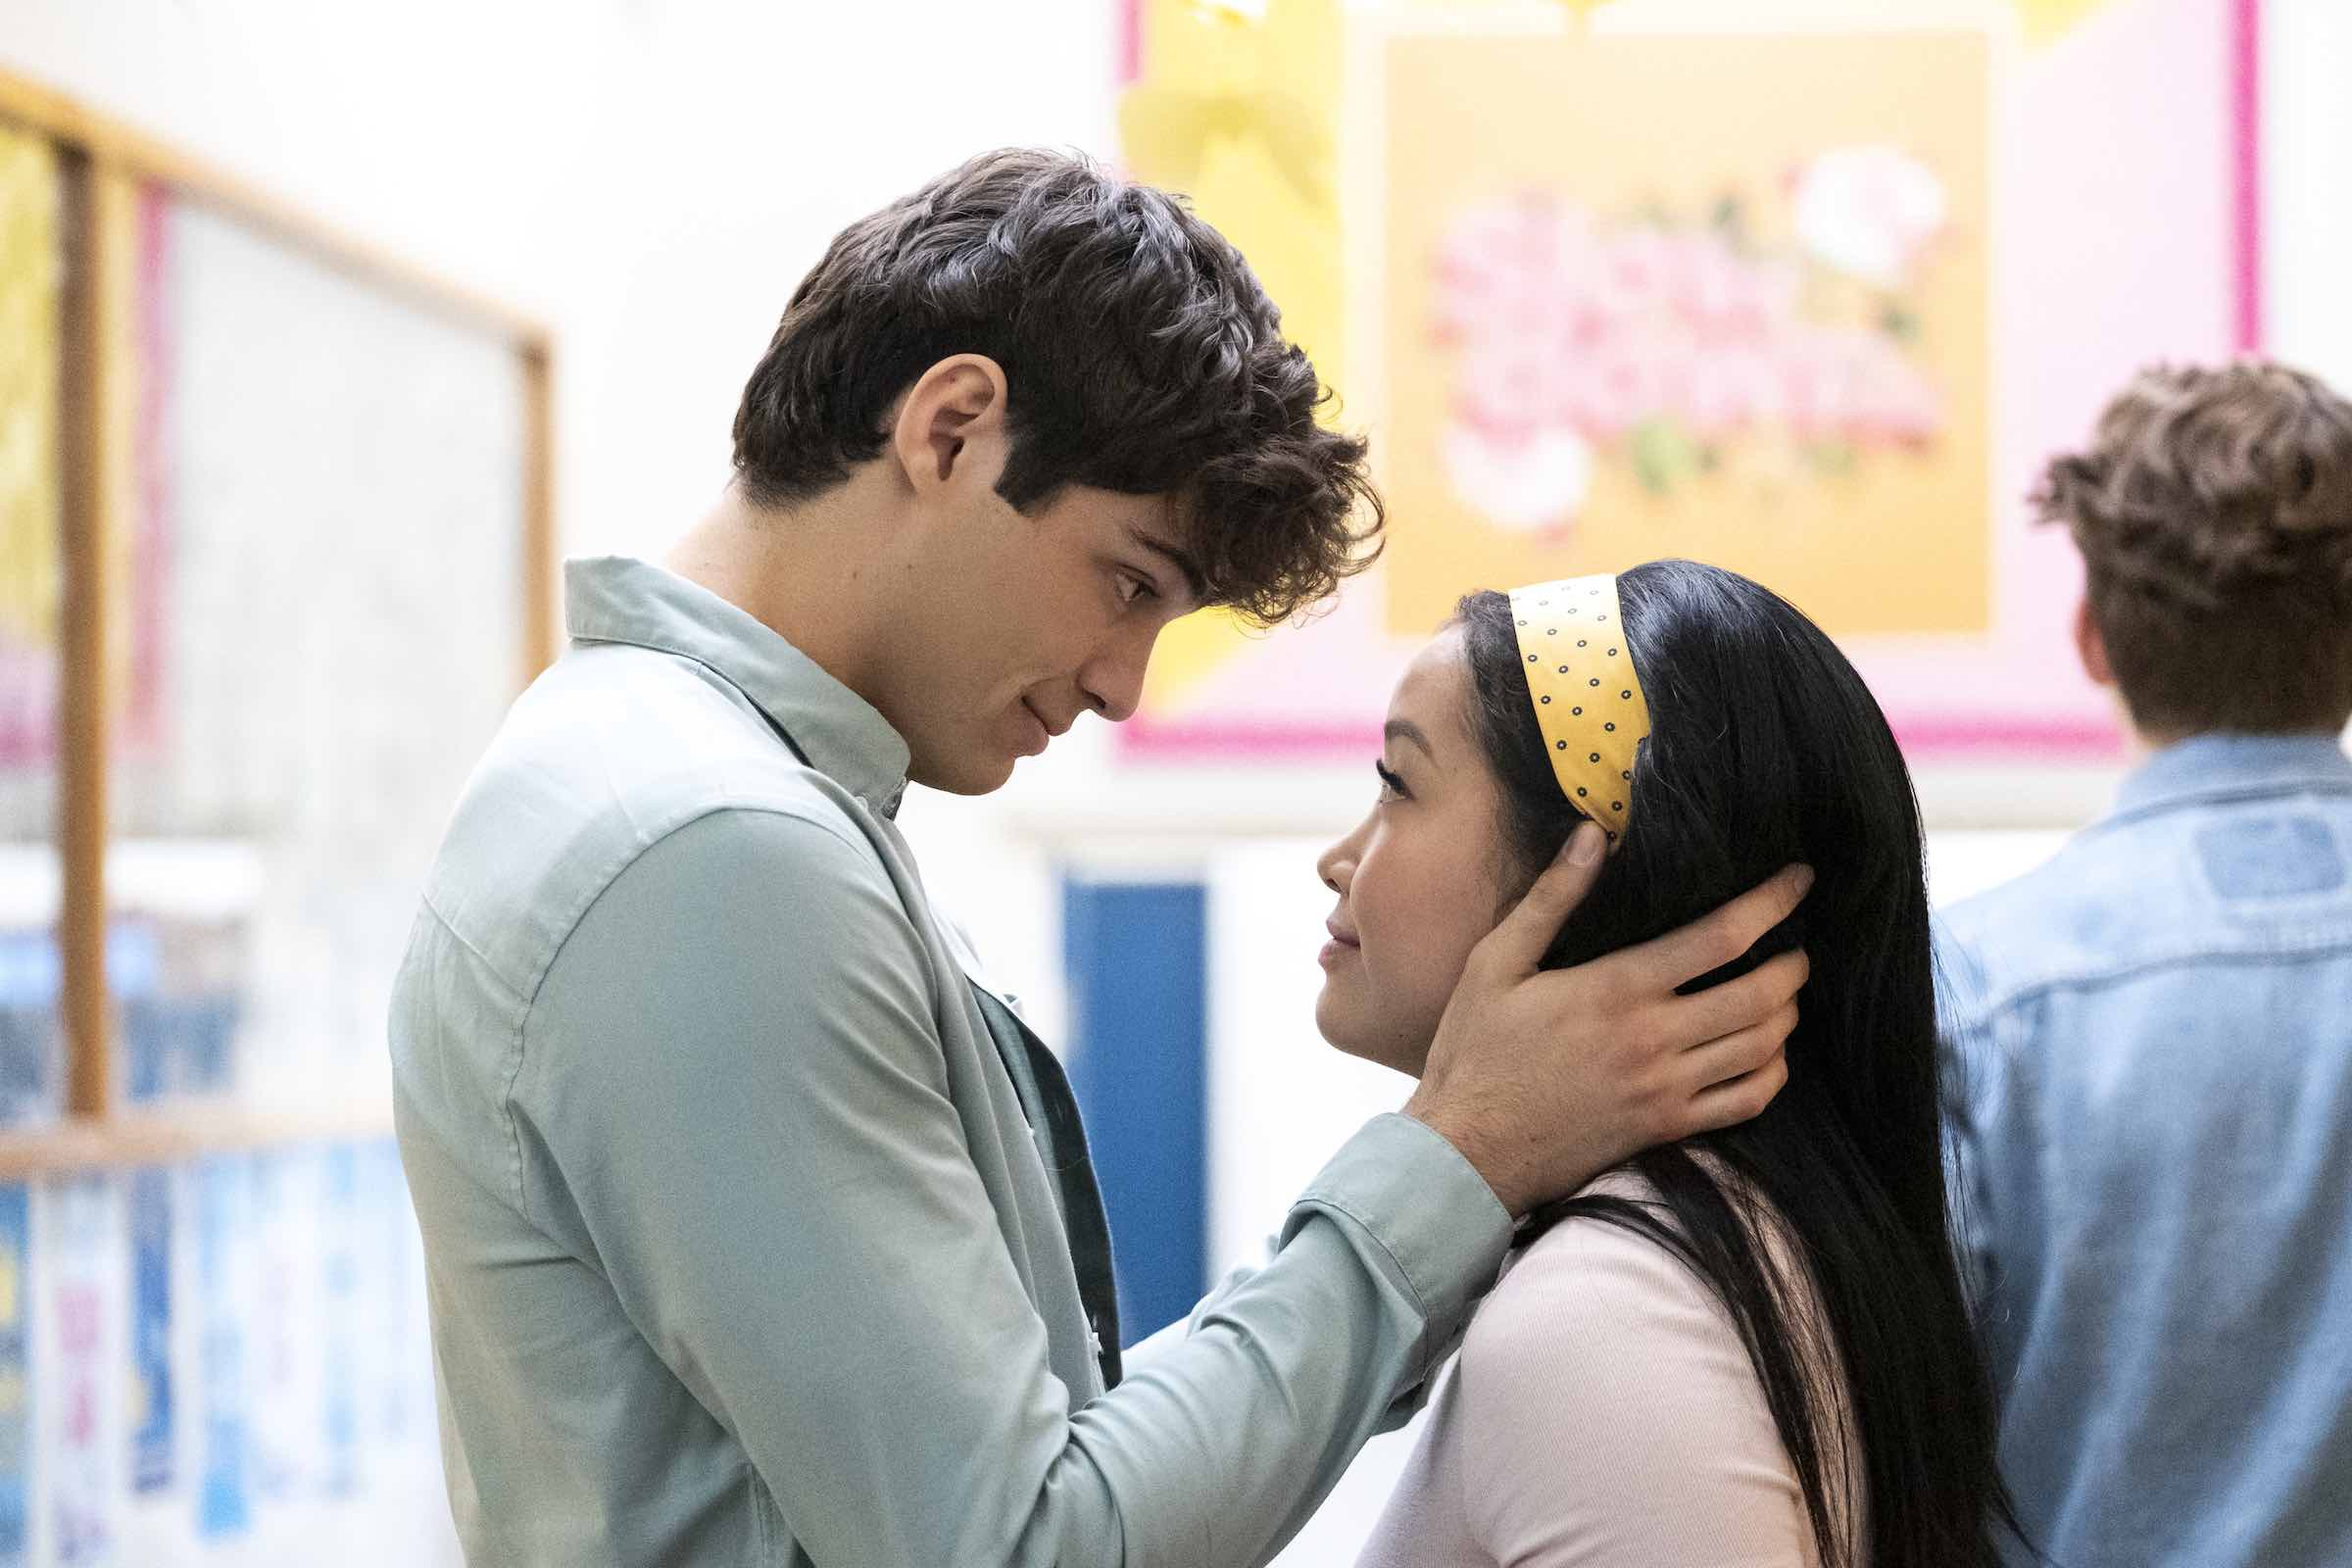 Netflix announced that they were going to go ahead with sequel 'To All the Boys I've Loved Before: P.S. I Still Love You'. Here's what we know.